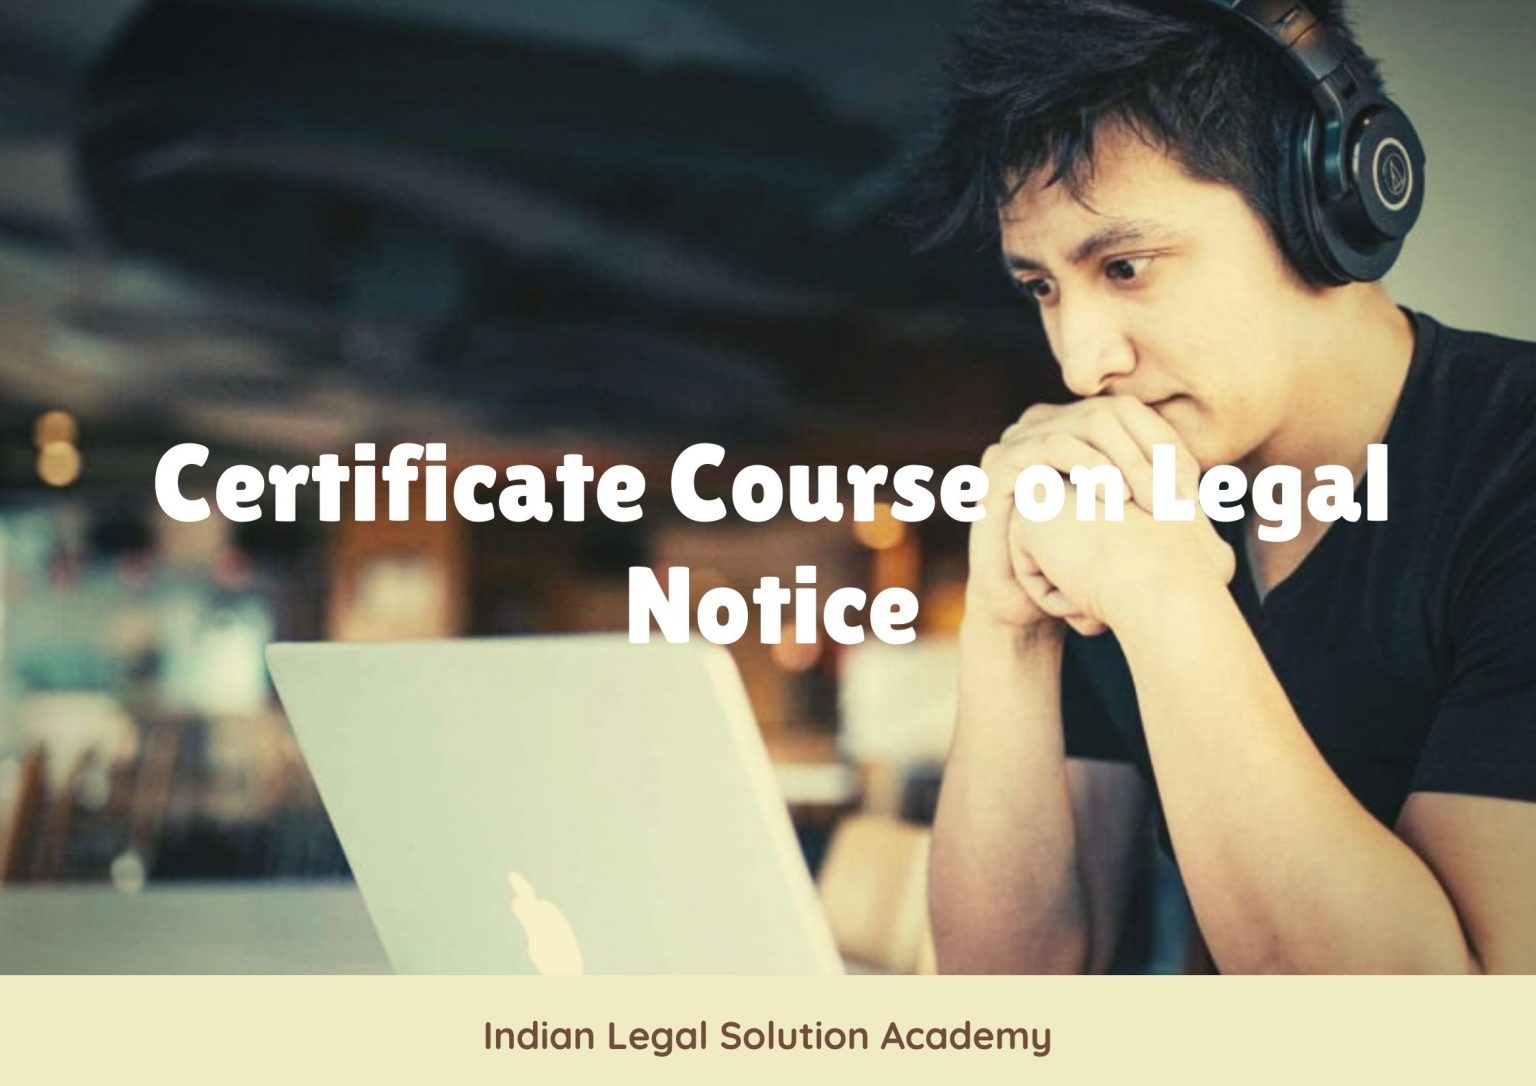 Basic Level Course on Legal Notice, Just at 100/INR